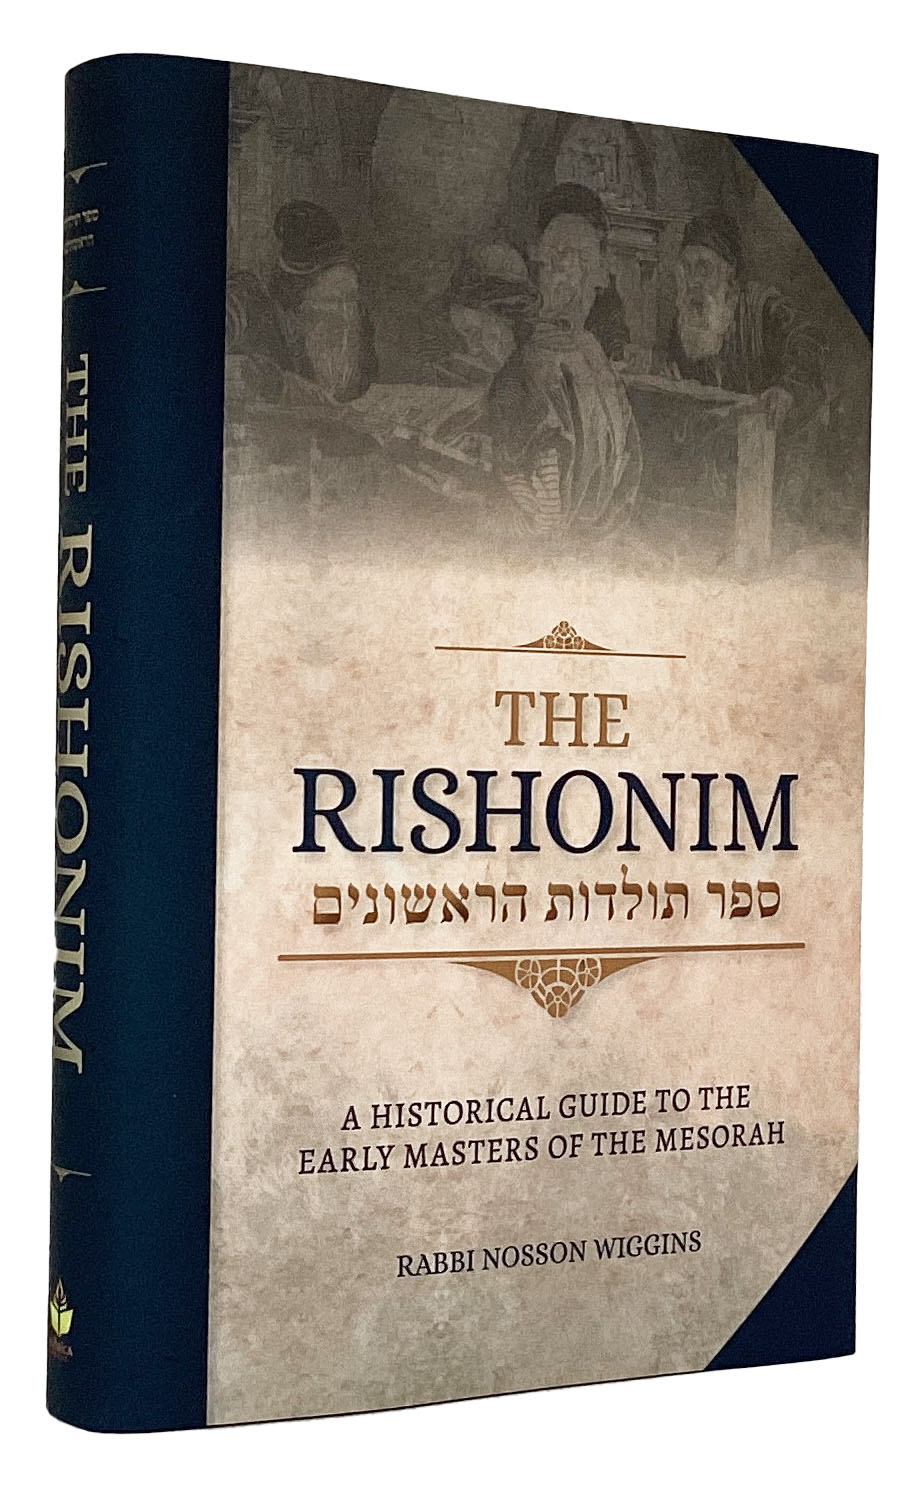 The Rishonim - A Historical Guide to the Early Masters of the Mesorah